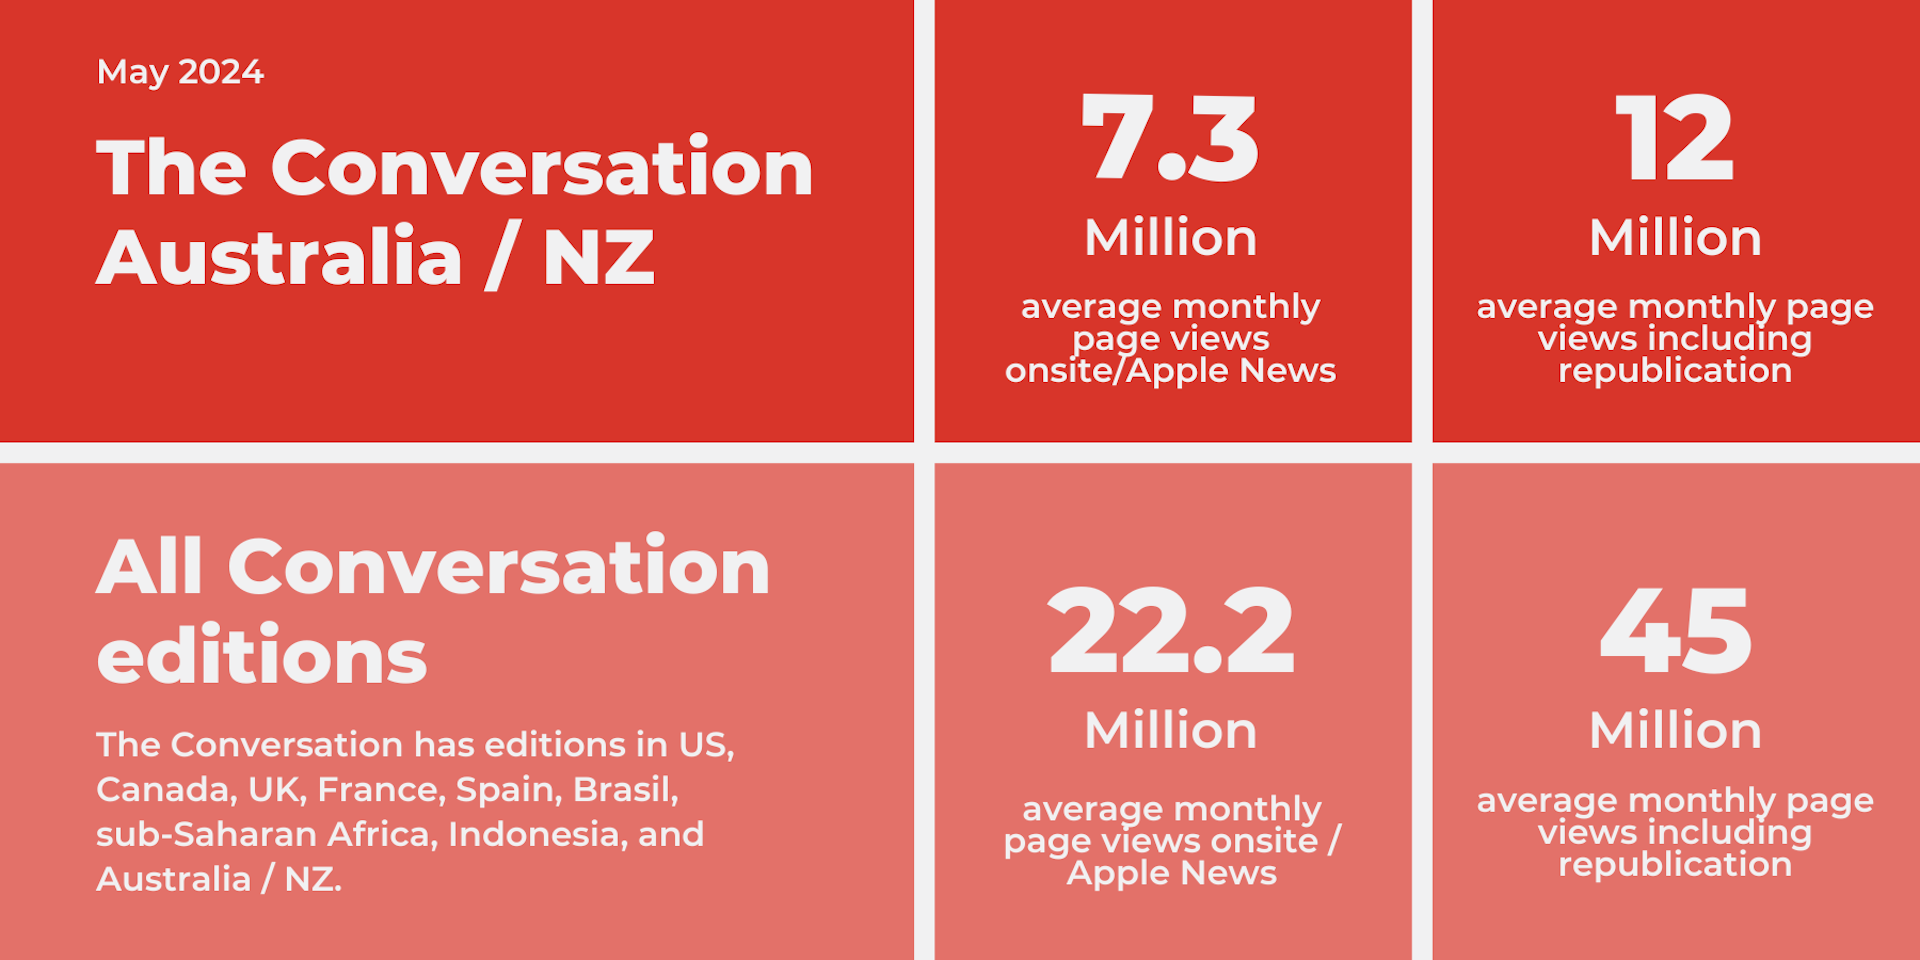 Readership of The Conversation Australia and New Zealand editions